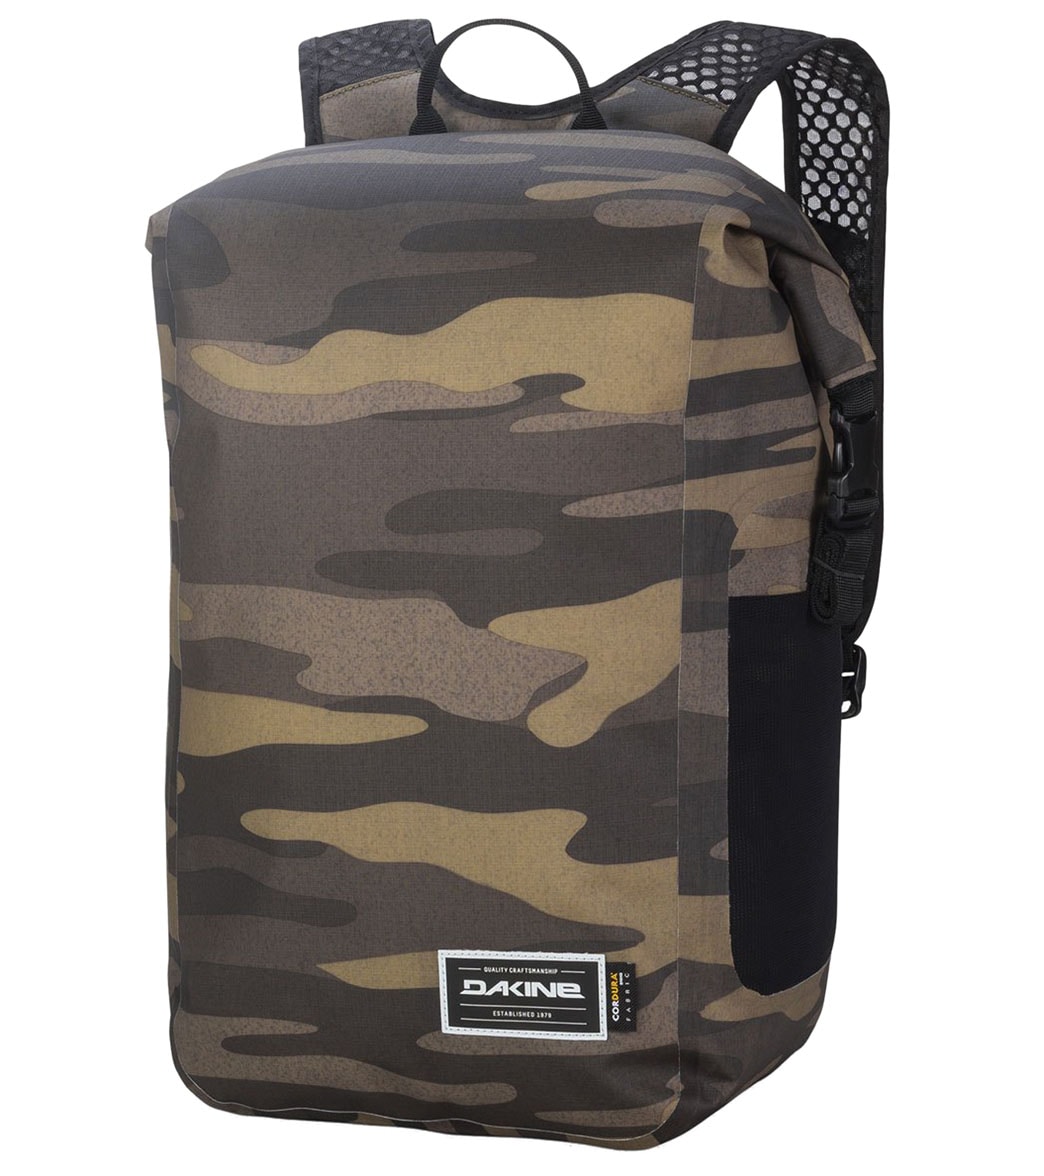 Dakine Cyclone 32L Roll Top Backpack at SwimOutlet.com - Free Shipping